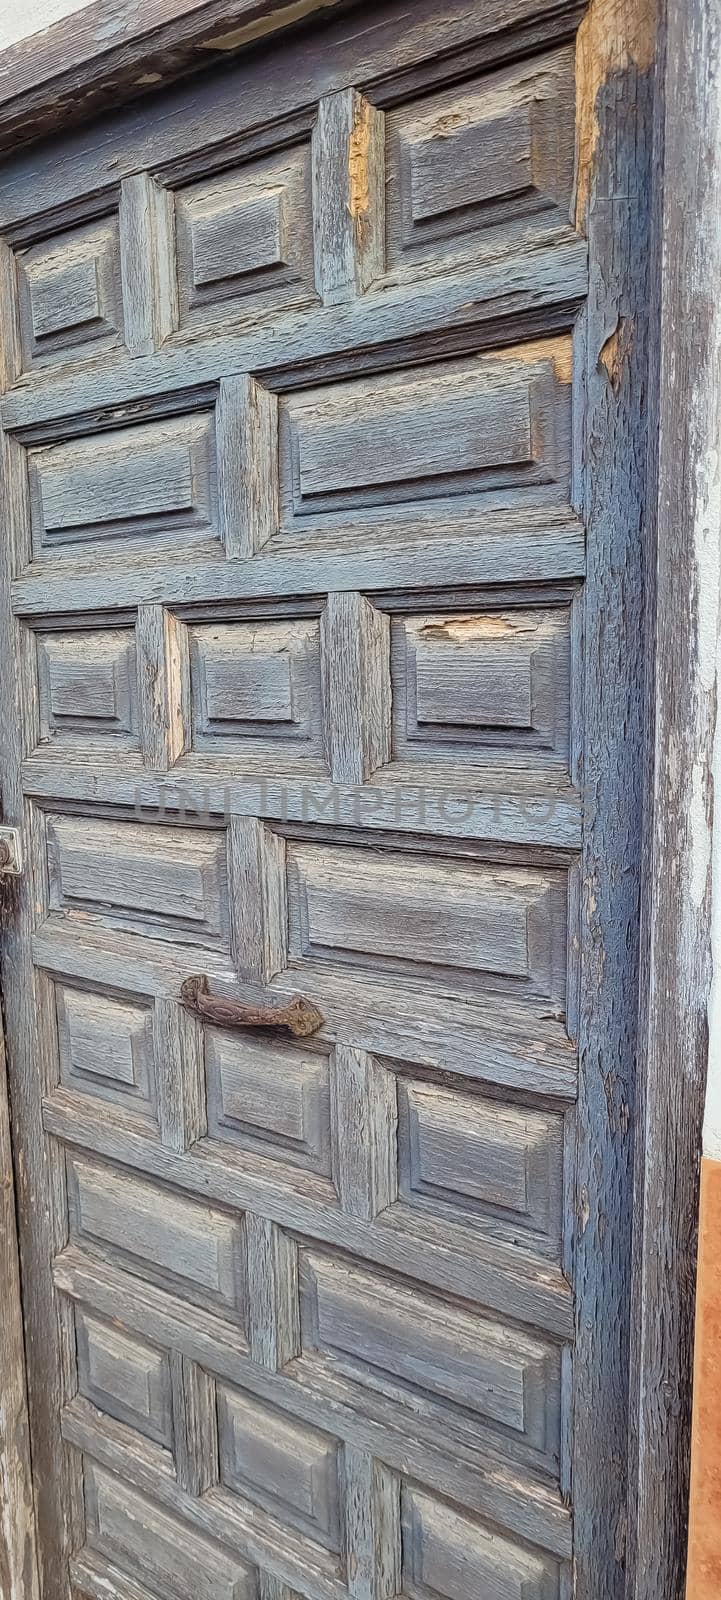 An old wooden door with traces of old paint and a rusty handle